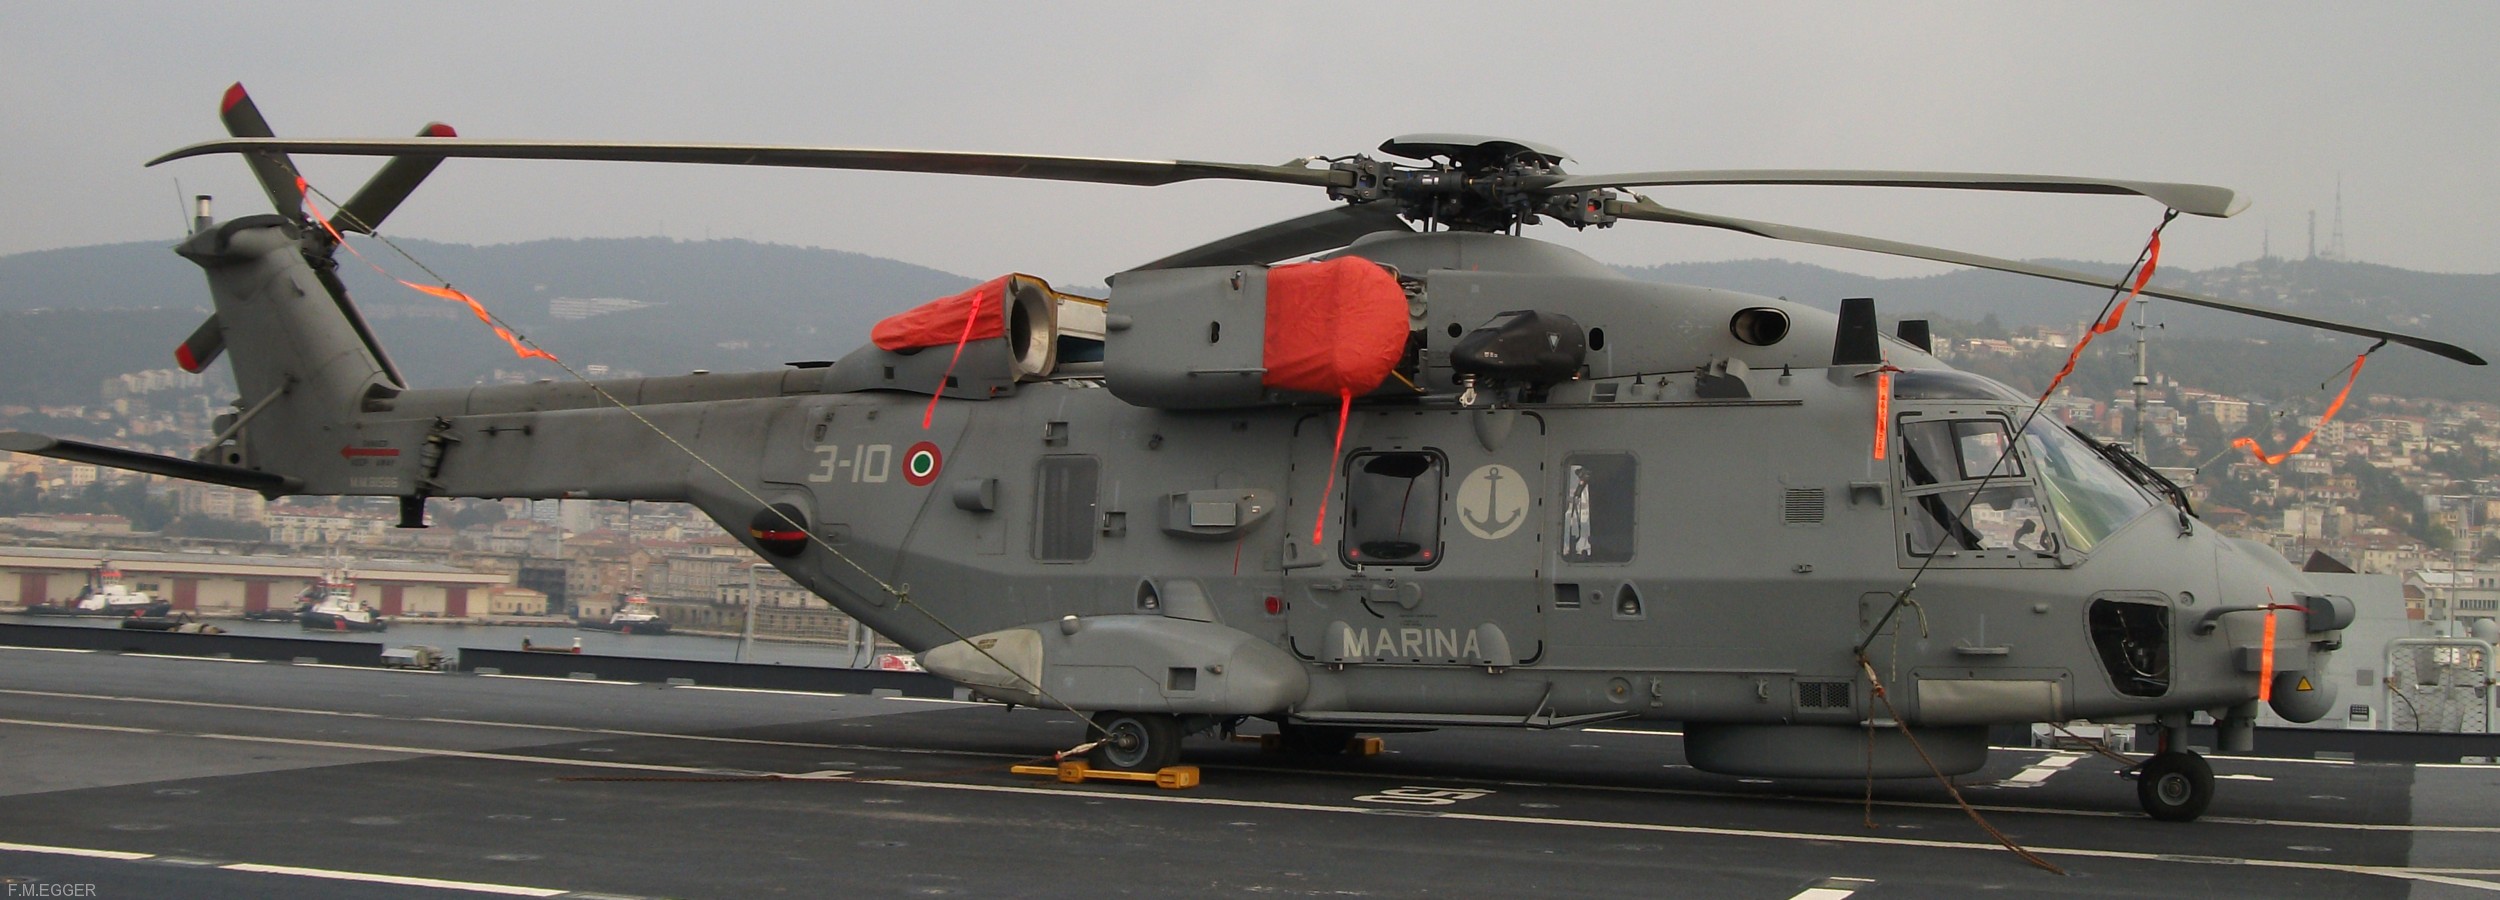 c-550 cavour aircraft carrier italian navy marina militare 60 sh-90a nh90nfh helicopter